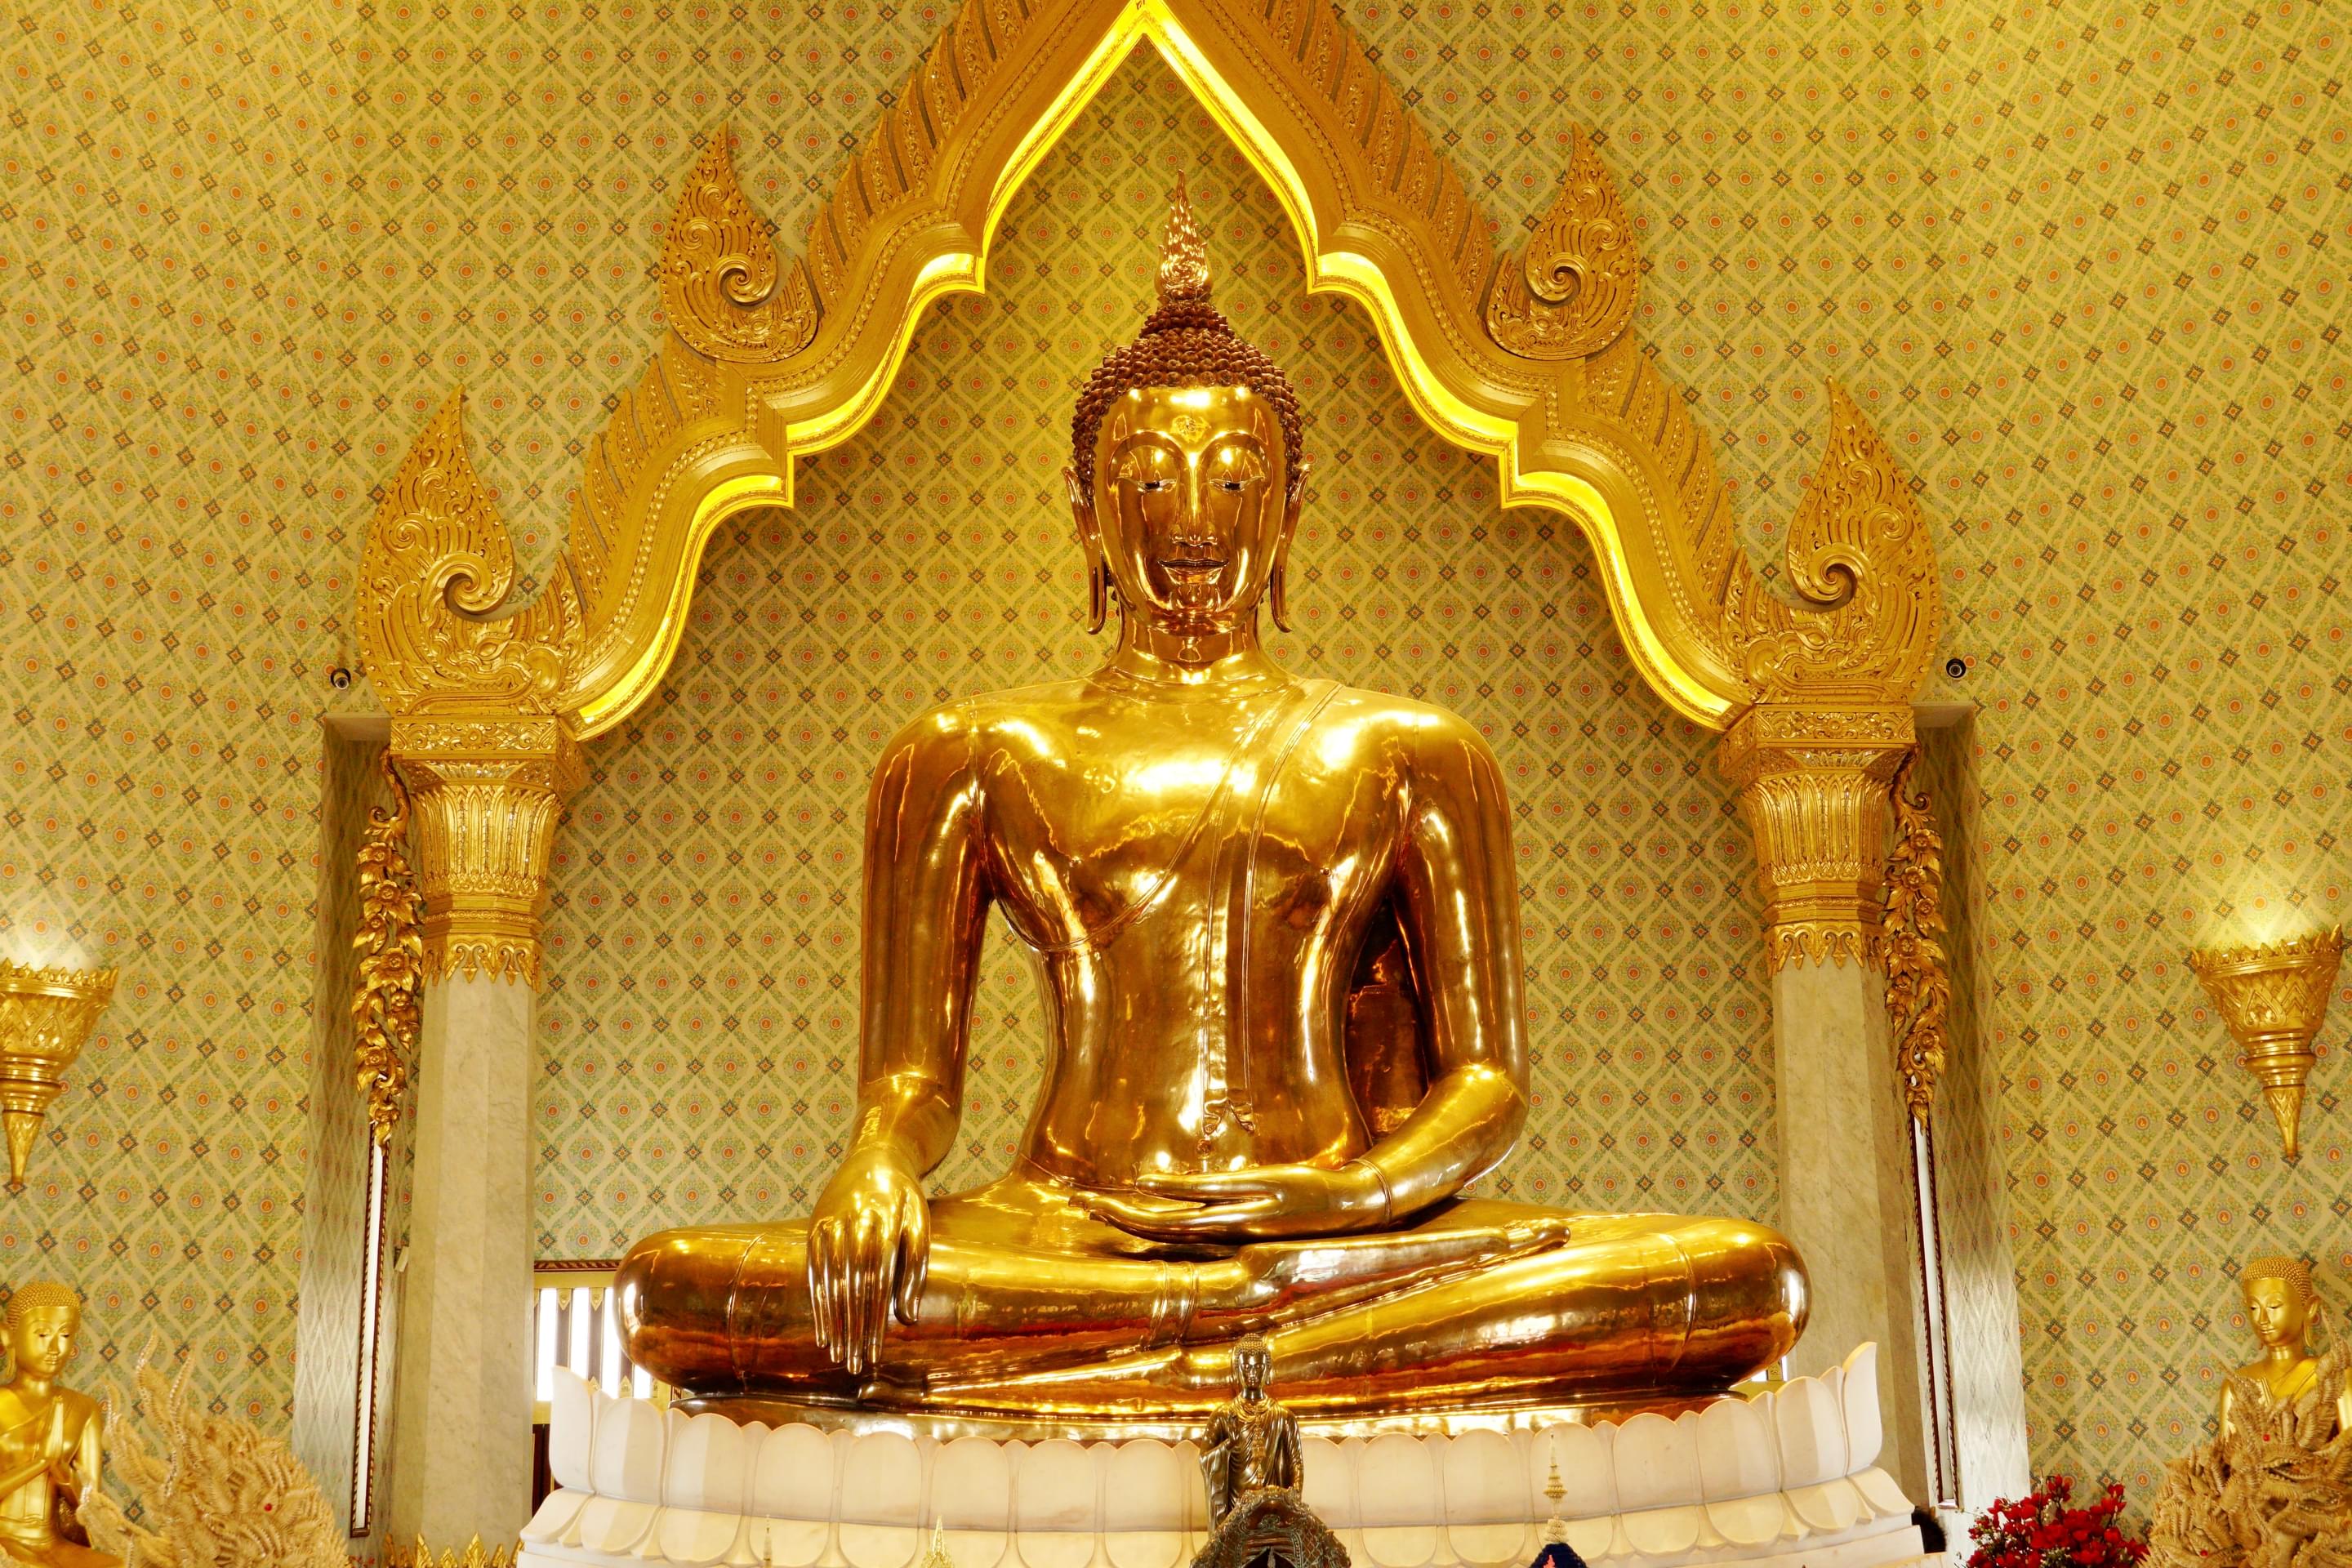 The Golden Buddha At Wat Traimit Overview